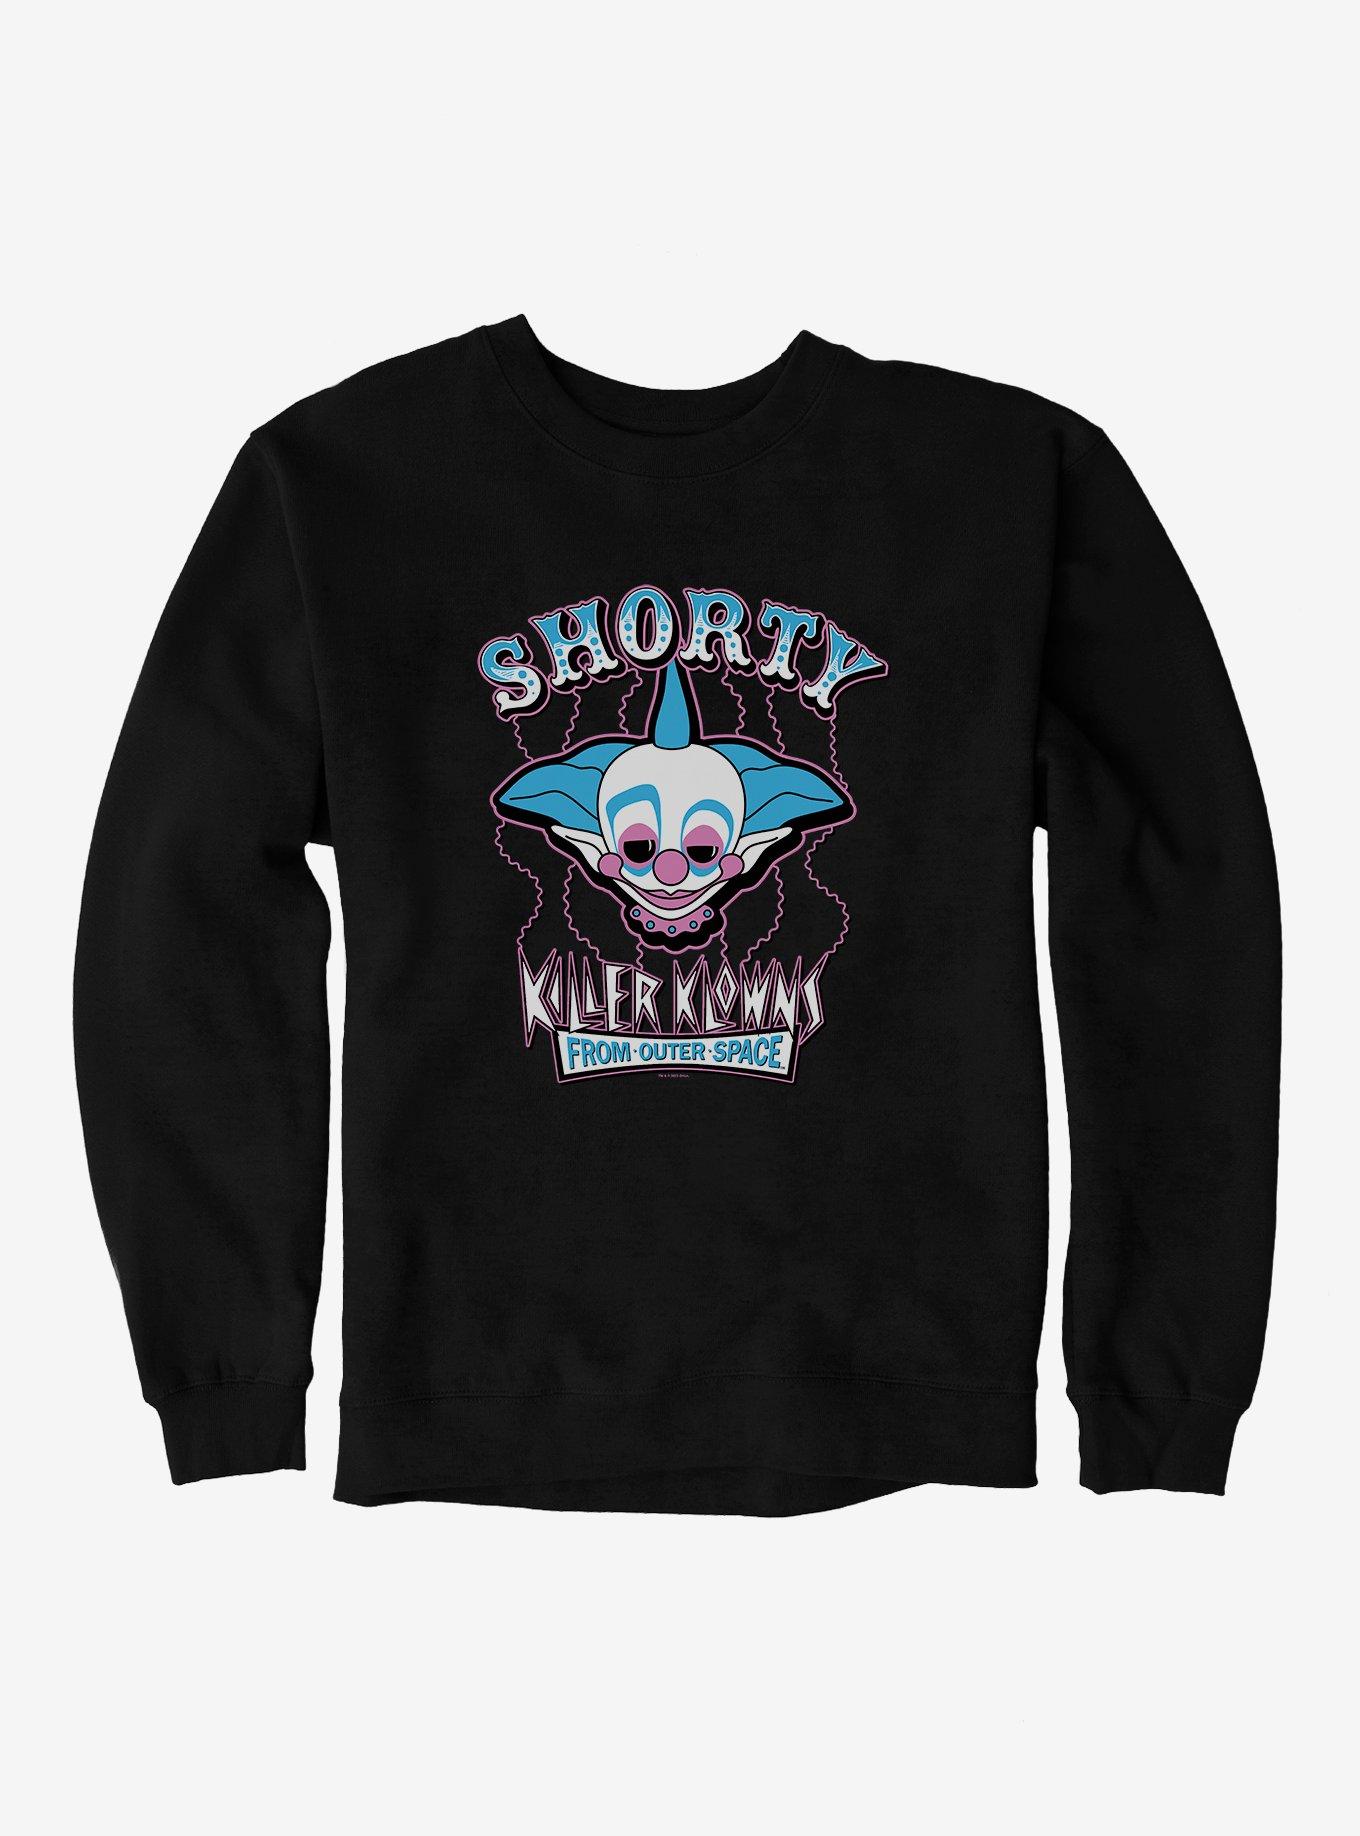 Killer Klowns From Outer Space Shorty Sweatshirt, BLACK, hi-res